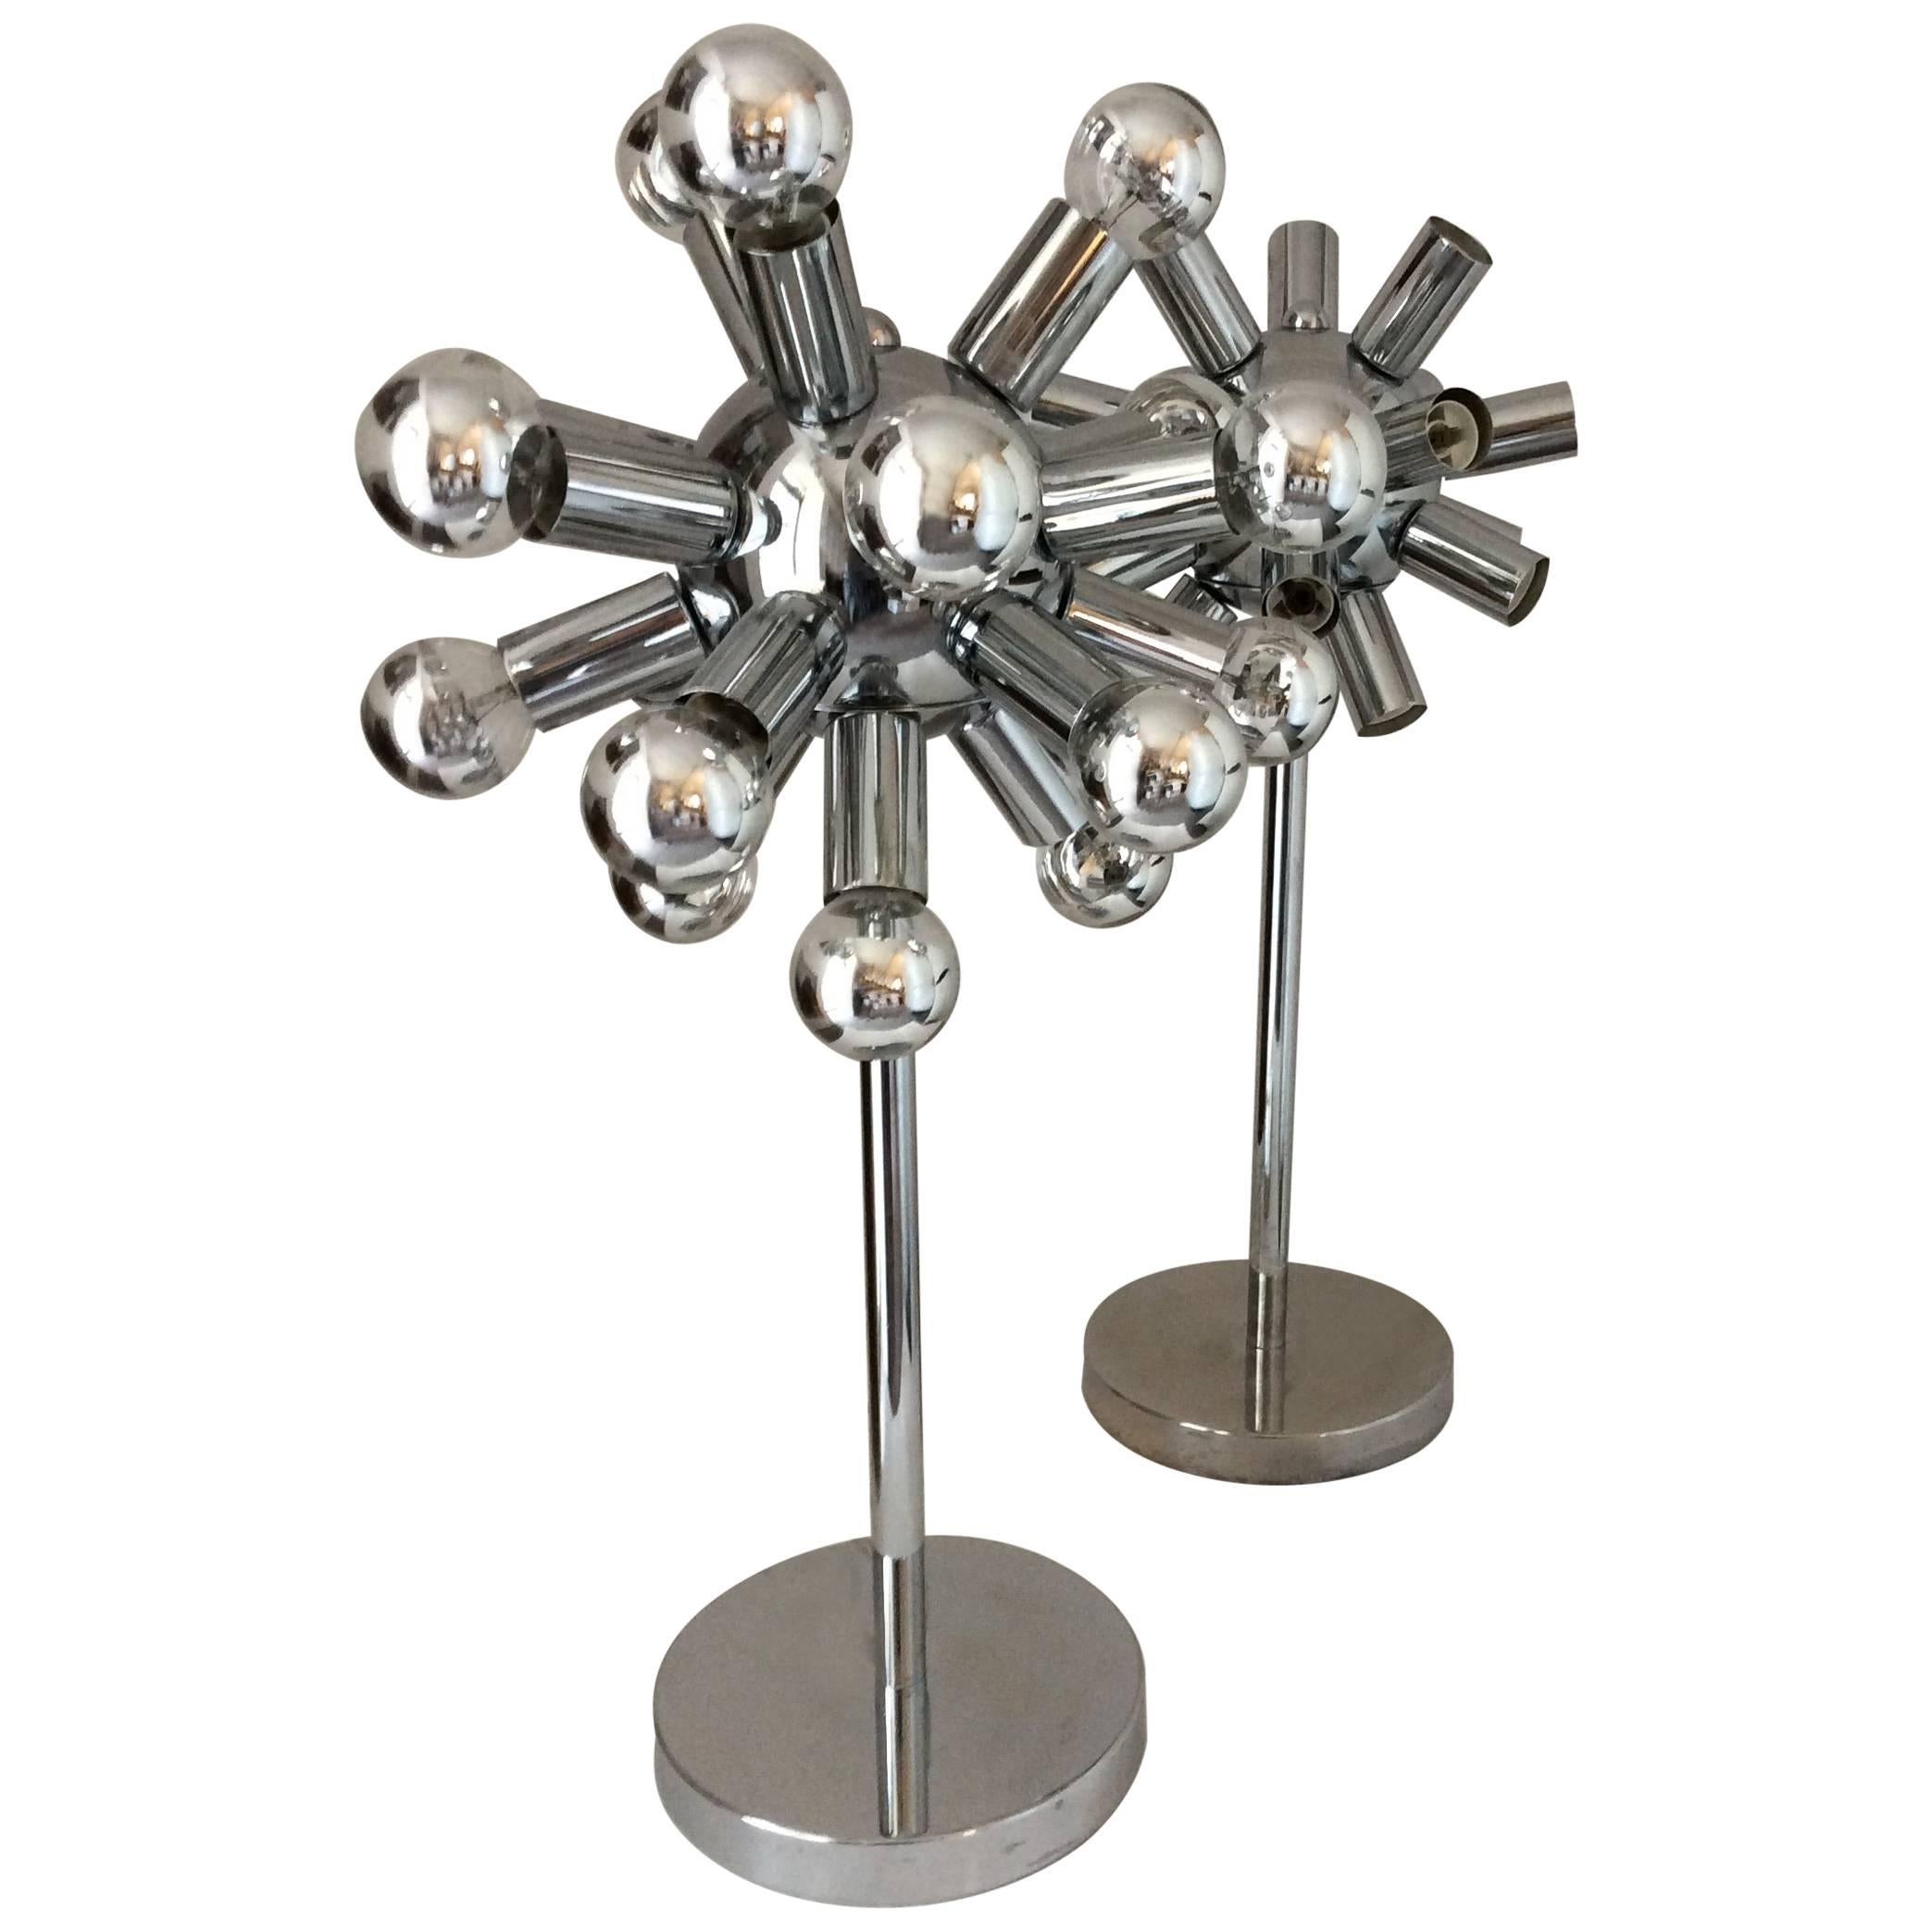 Pair of Mid-Century Modern American Chrome Sputnik Table Lamps, Torino Style For Sale